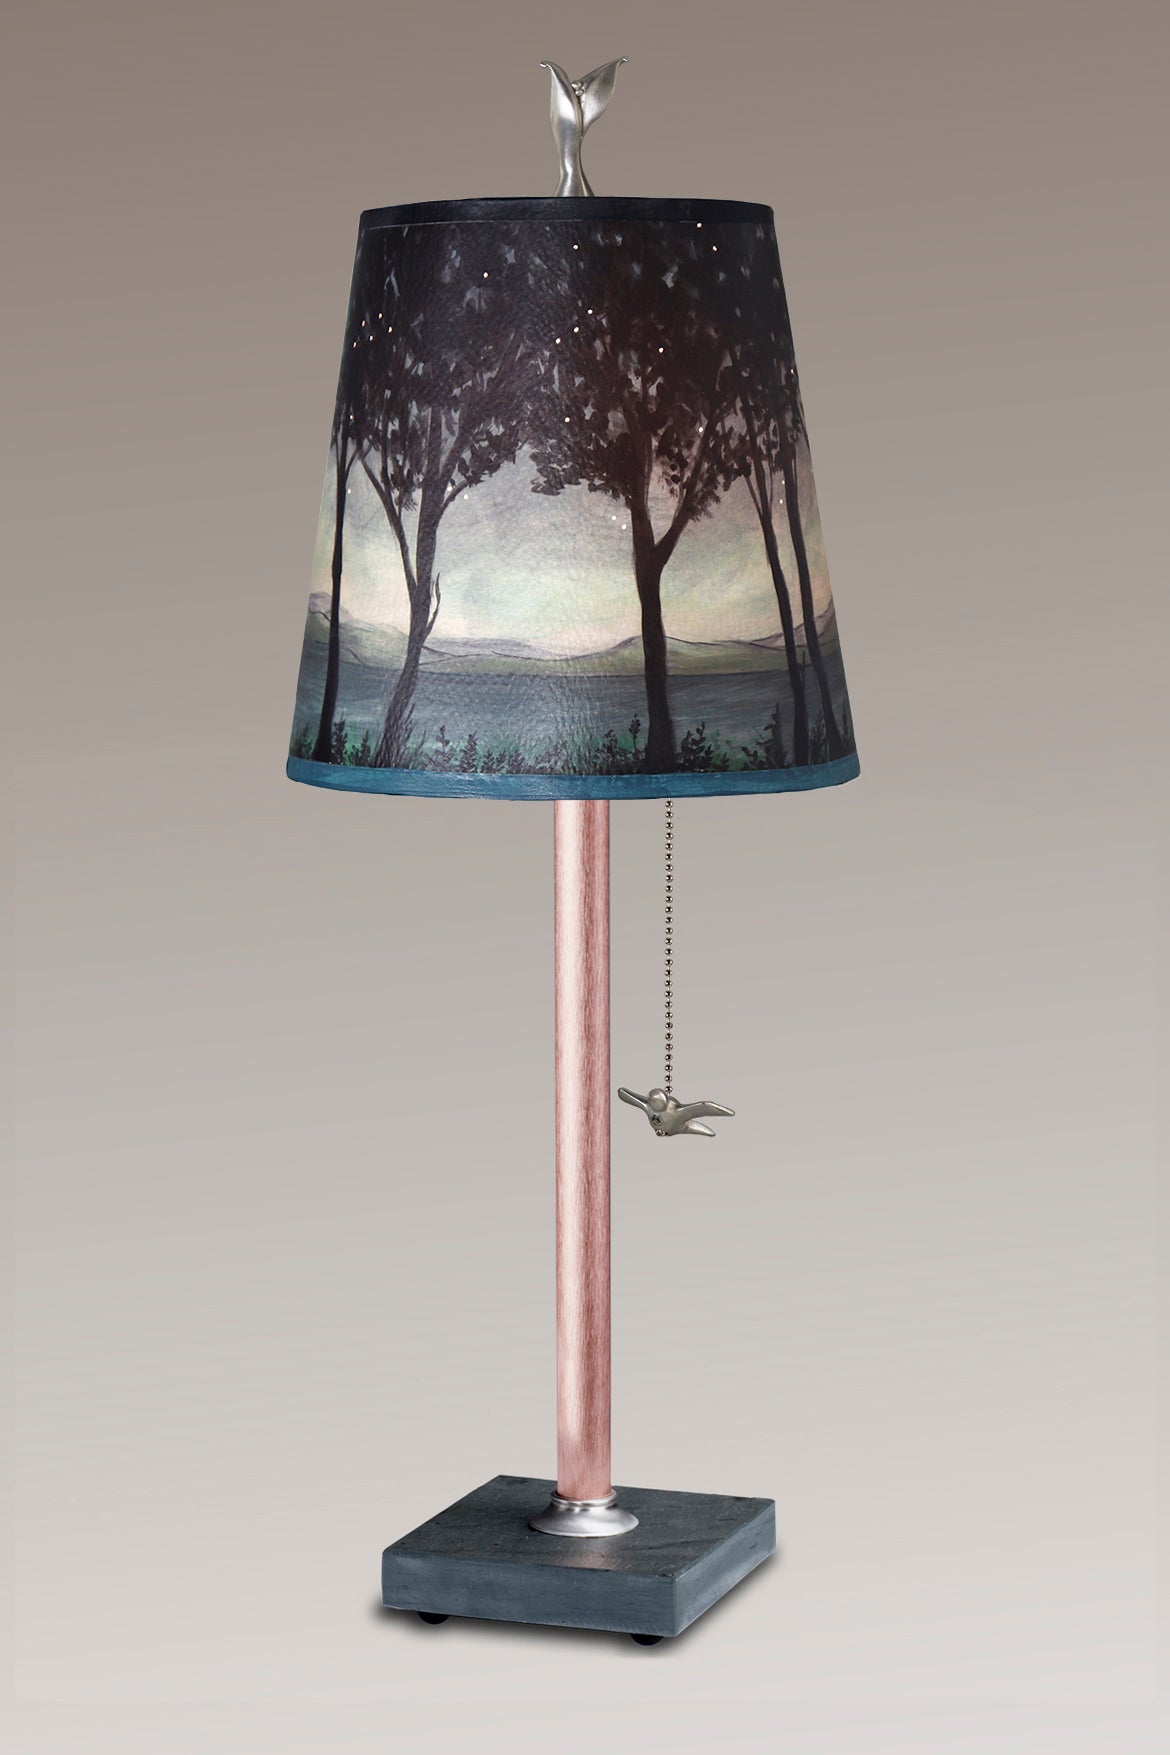 Janna Ugone & Co Table Lamps Copper Table Lamp with Small Drum in Twilight